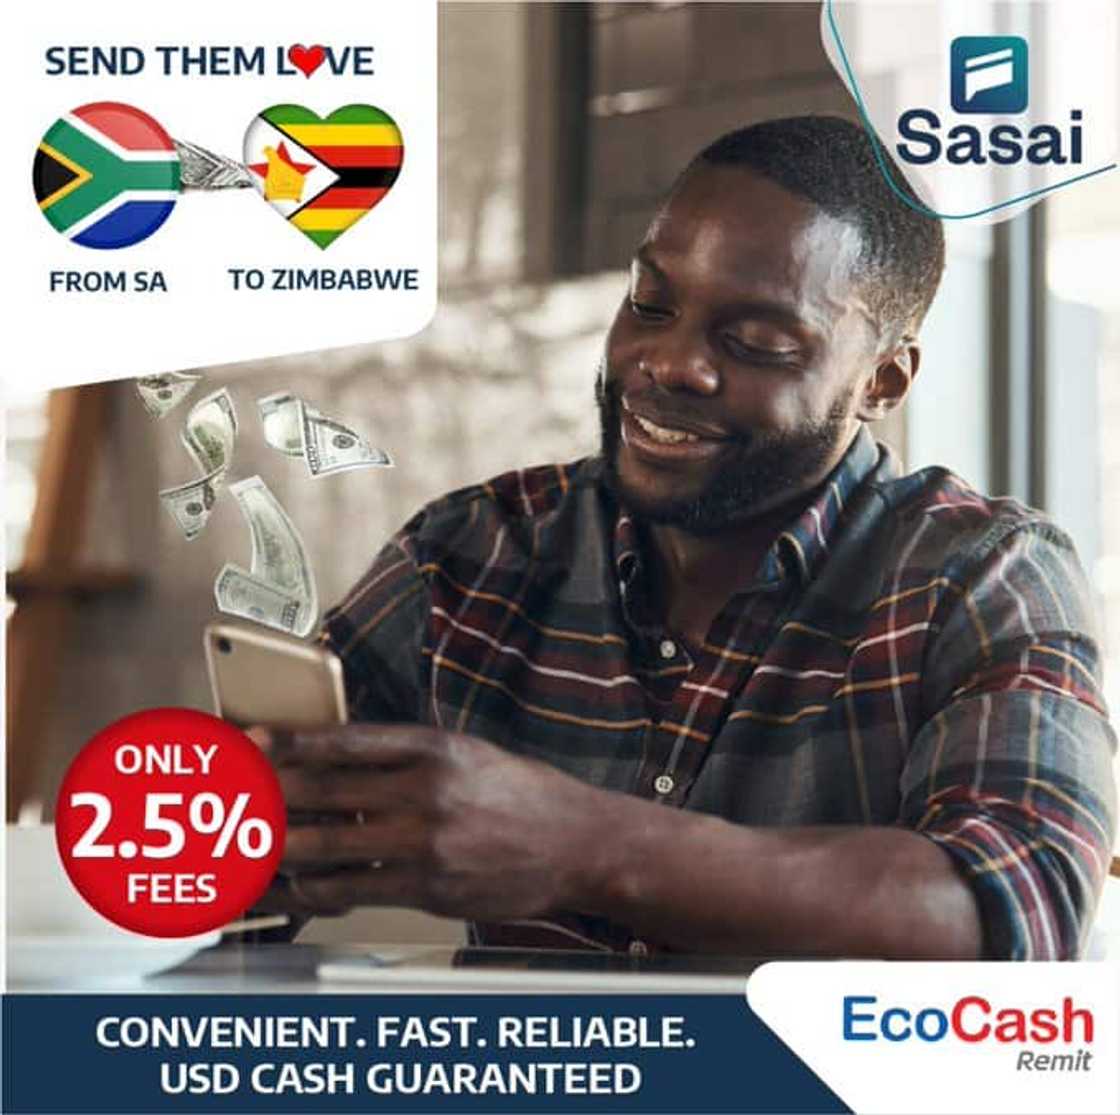 EcoCash charges